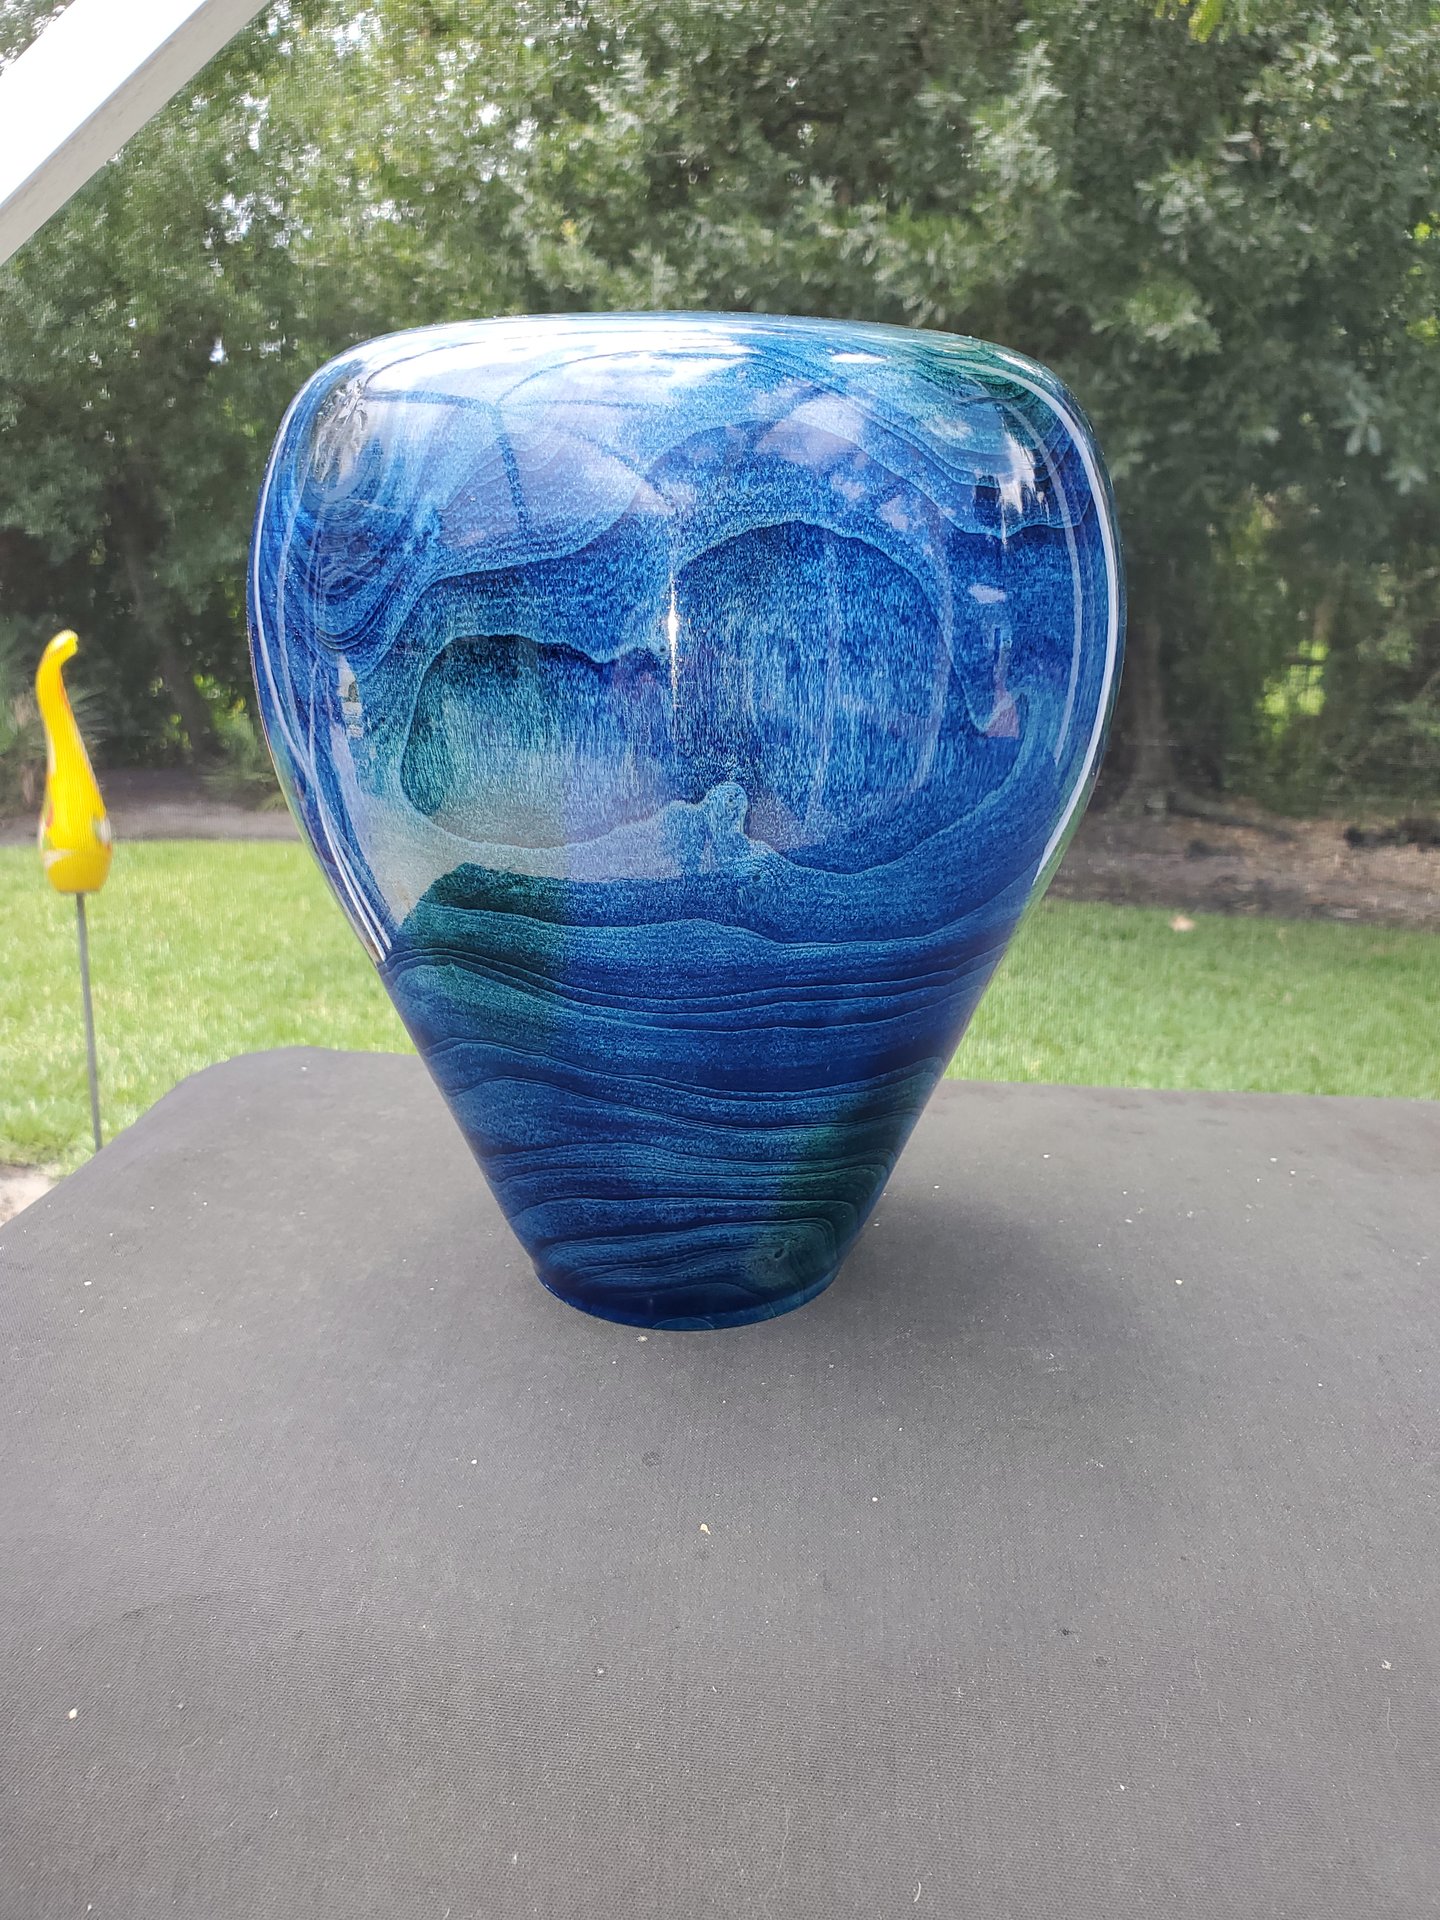 Hollow form in blue